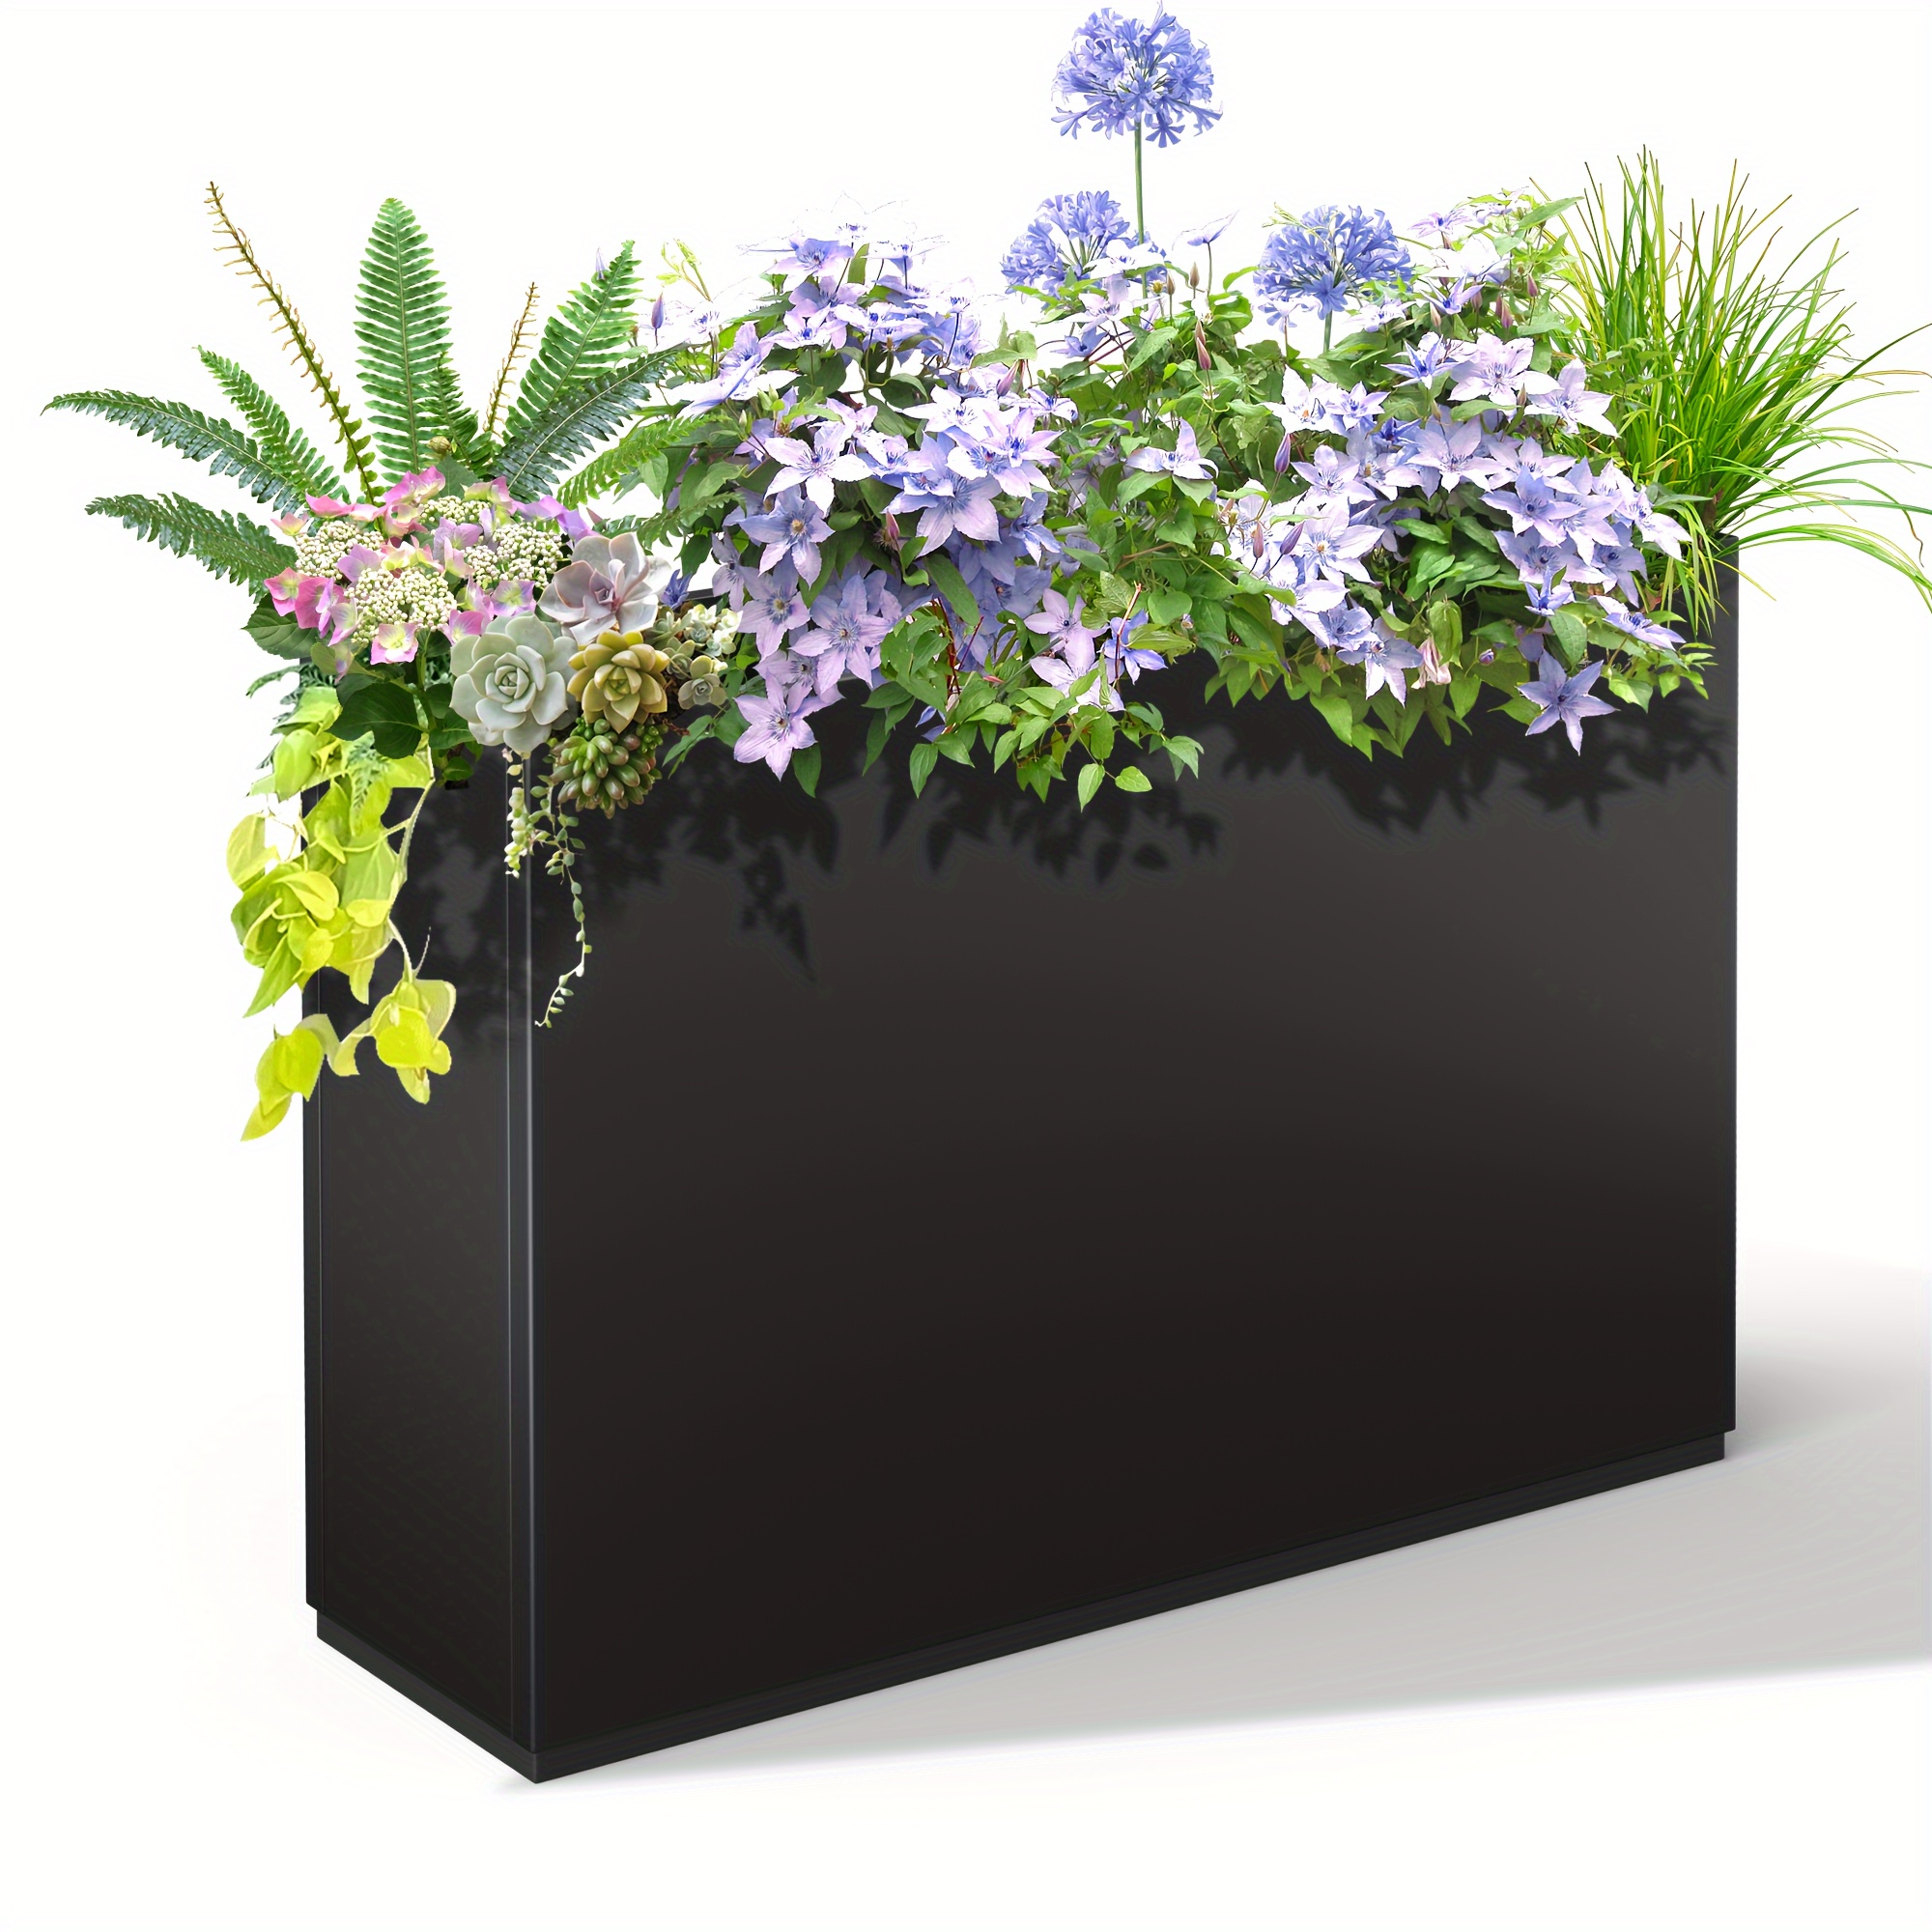 

Metal Rectangular Planter Large Planters For Outdoor Plants, Tall Outdoor Planter With Drainage Hole, Large Outdoor Planters For Patio Garden (35.4"l X 9"w X 25.6"h)